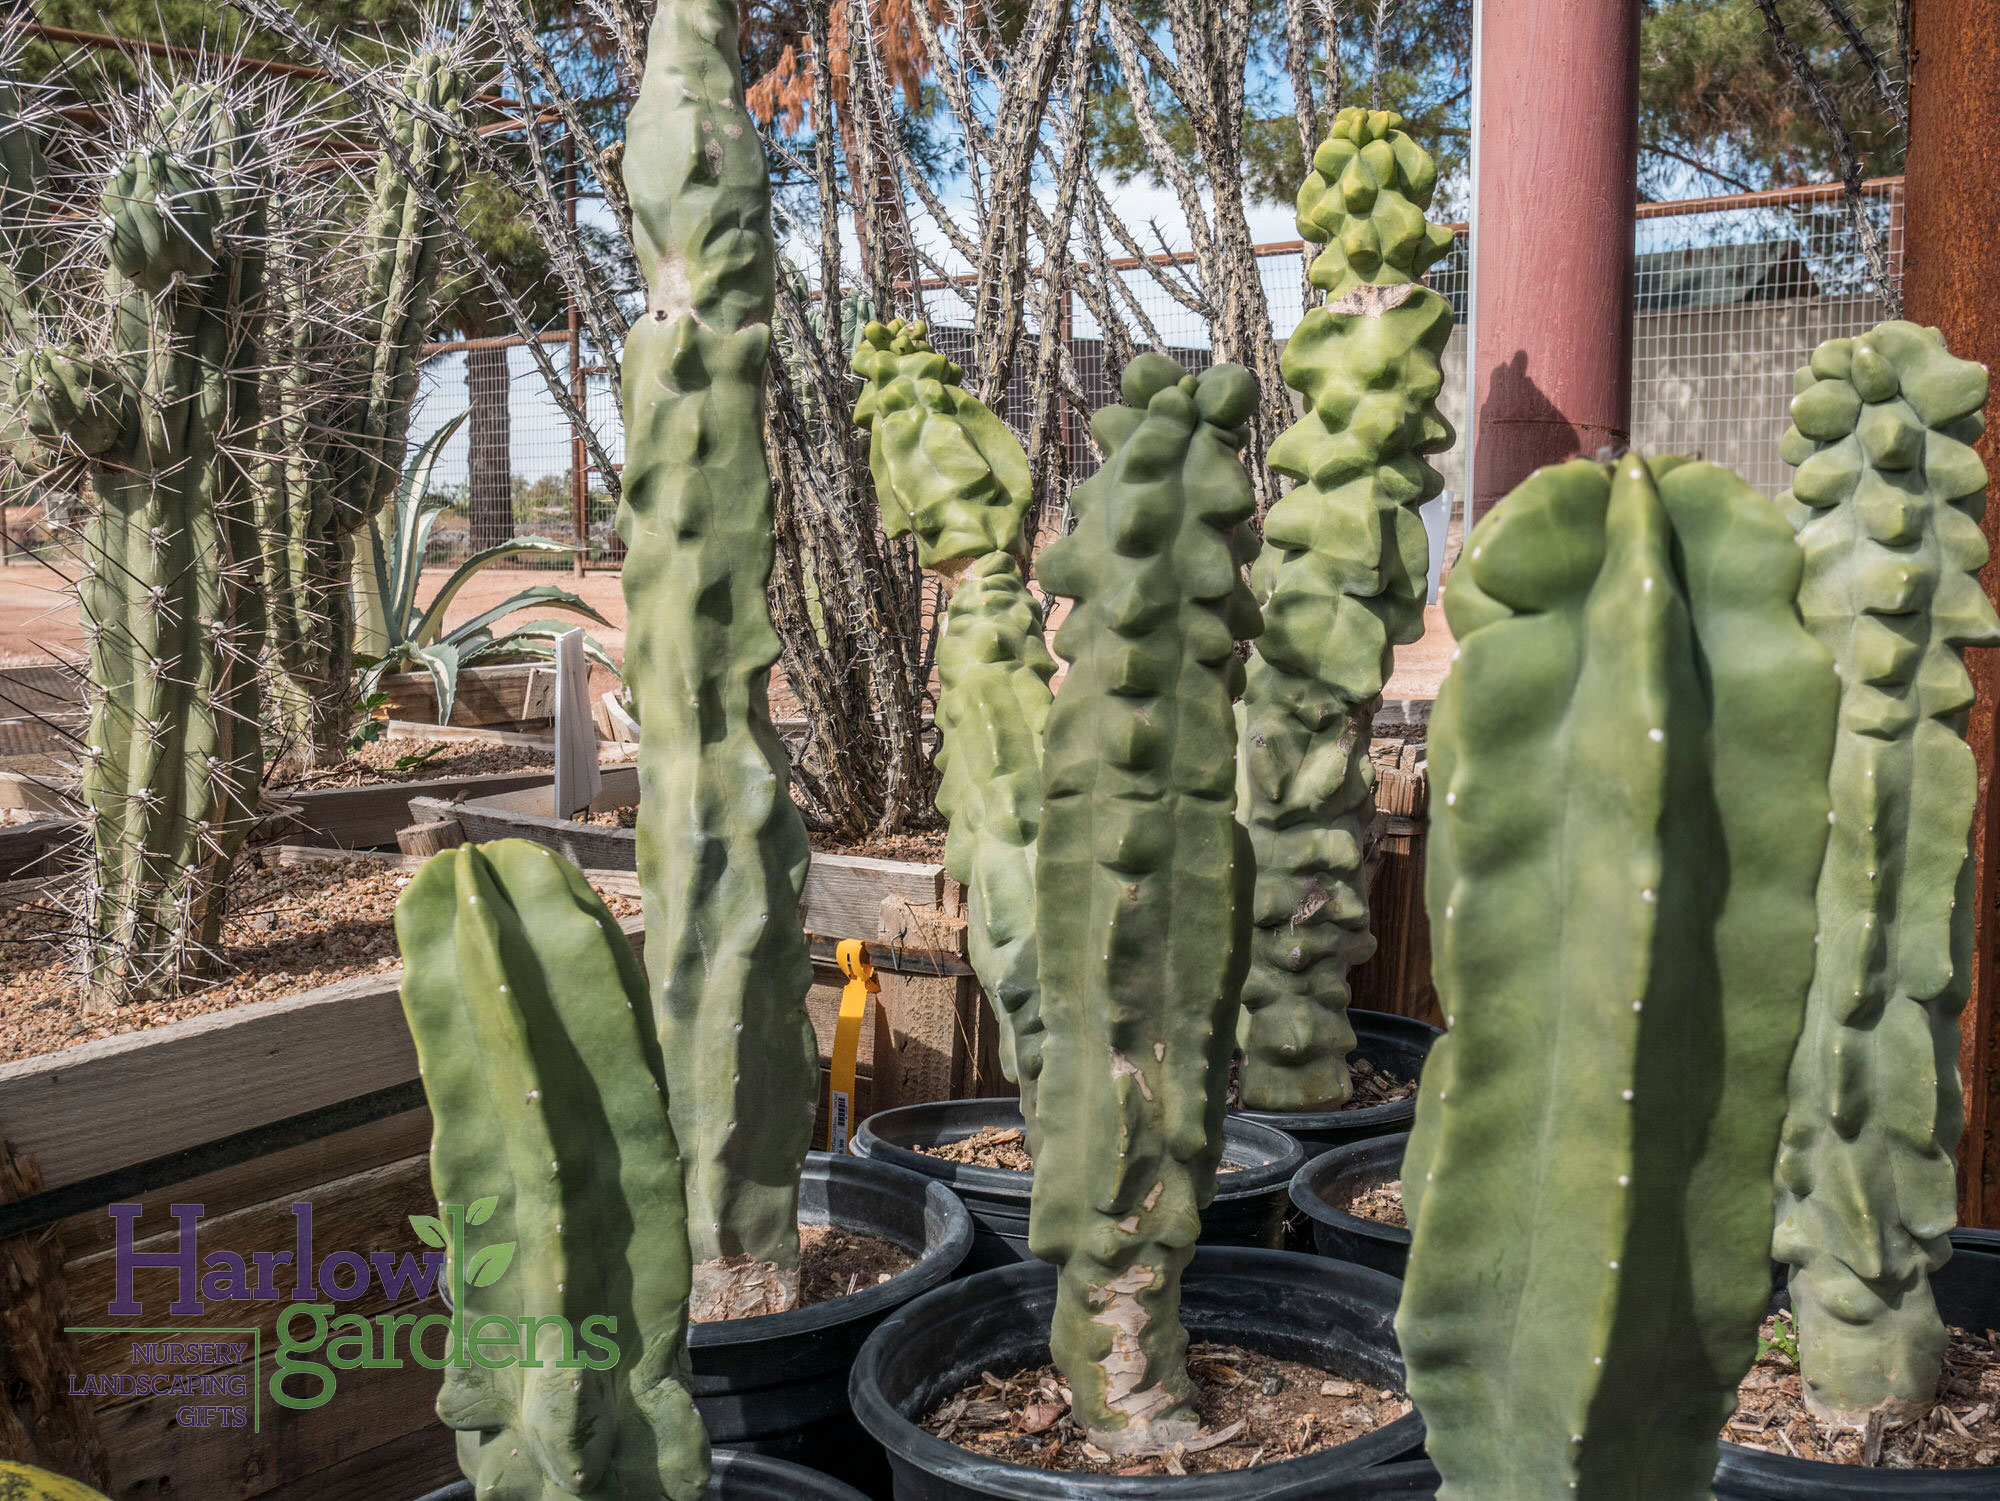 Totem Pole Cactus for sale at Harlow Gardens Tucson.